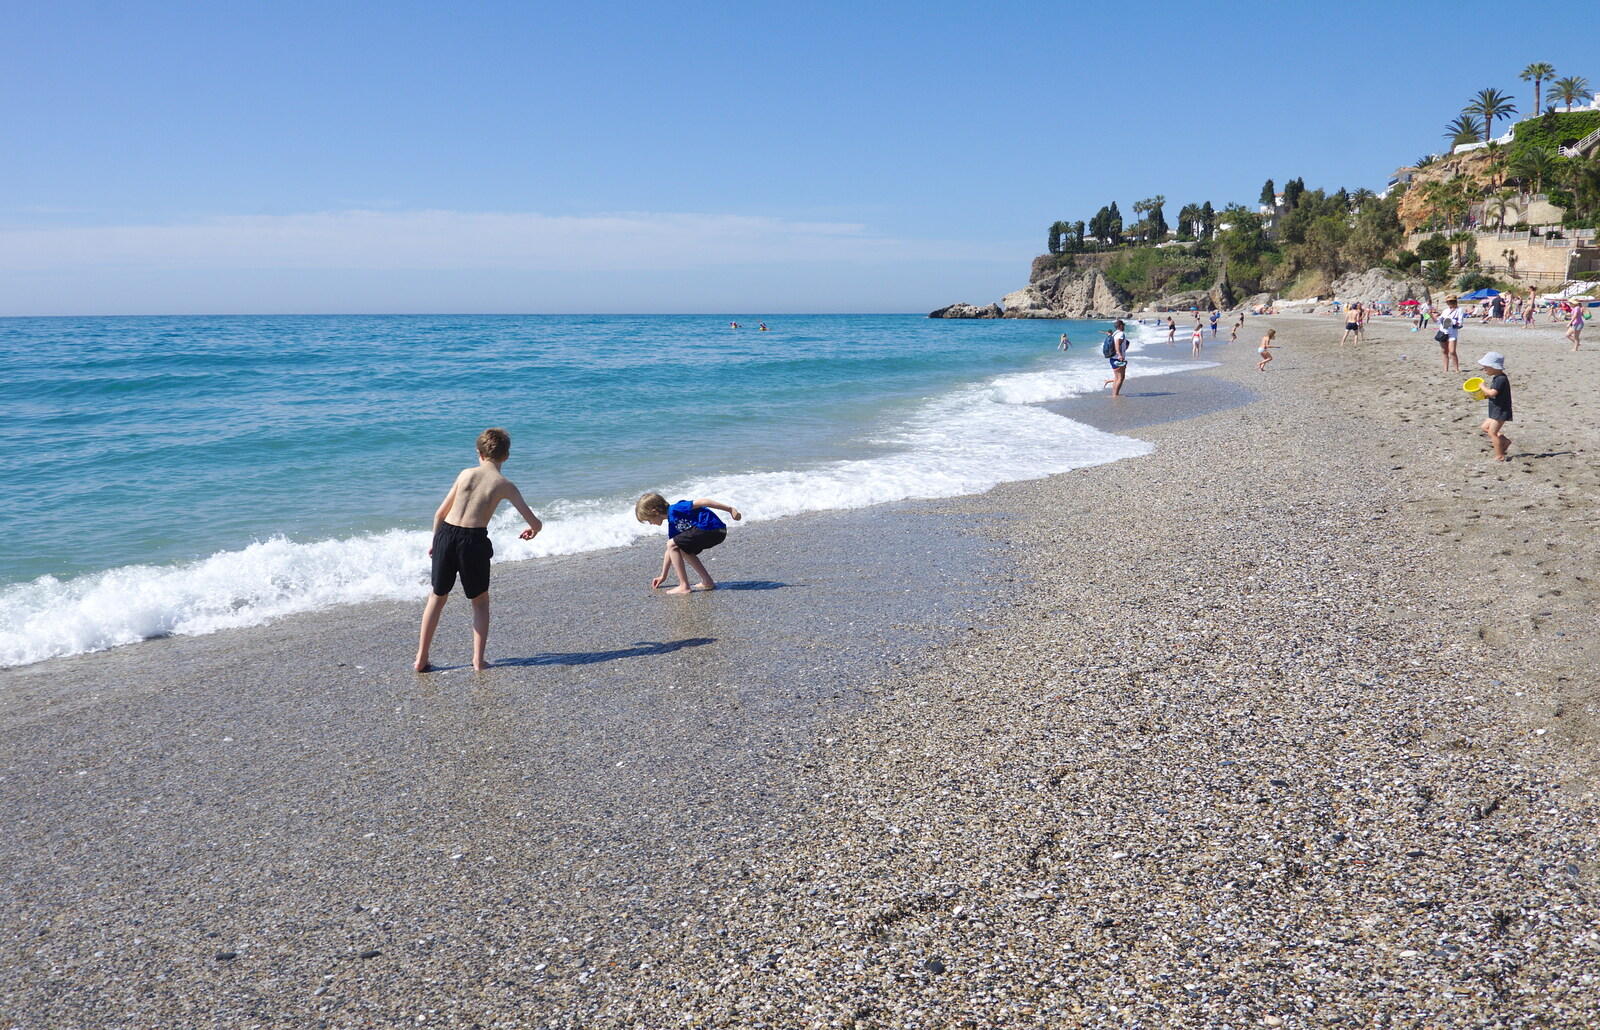 The boys hurl stones into the sea from A Holiday in Nerja, Andalusia, Spain - 15th April 2019